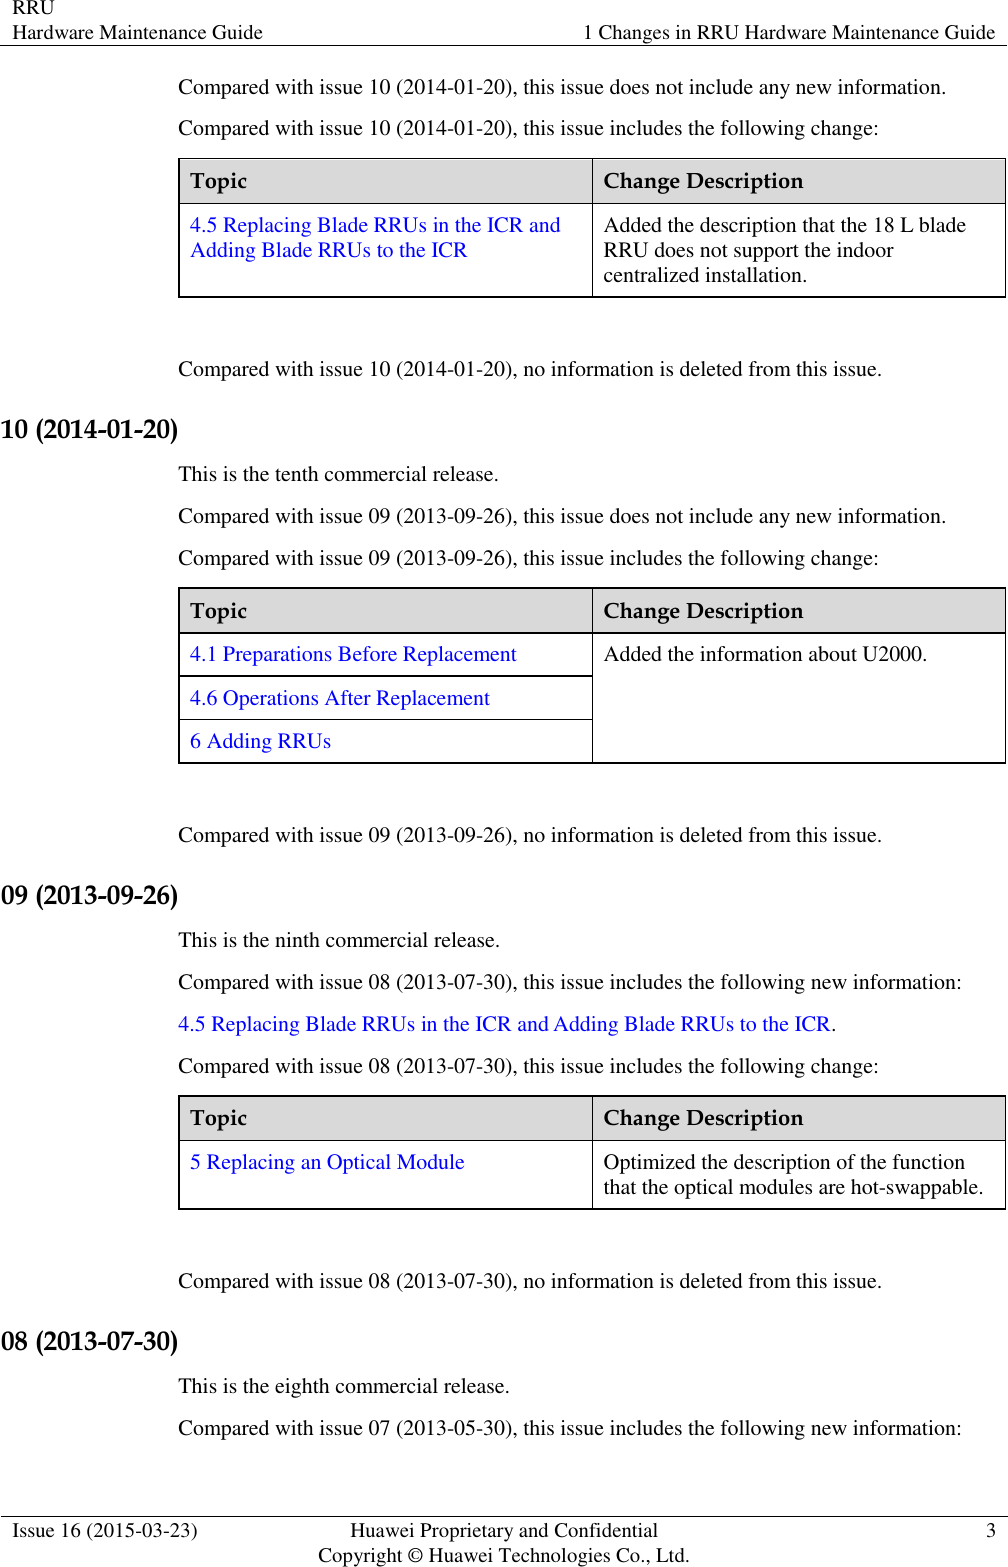 RRU Hardware Maintenance Guide 1 Changes in RRU Hardware Maintenance Guide  Issue 16 (2015-03-23) Huawei Proprietary and Confidential                                     Copyright © Huawei Technologies Co., Ltd. 3  Compared with issue 10 (2014-01-20), this issue does not include any new information. Compared with issue 10 (2014-01-20), this issue includes the following change: Topic Change Description 4.5 Replacing Blade RRUs in the ICR and Adding Blade RRUs to the ICR Added the description that the 18 L blade RRU does not support the indoor centralized installation.  Compared with issue 10 (2014-01-20), no information is deleted from this issue. 10 (2014-01-20) This is the tenth commercial release. Compared with issue 09 (2013-09-26), this issue does not include any new information. Compared with issue 09 (2013-09-26), this issue includes the following change: Topic Change Description 4.1 Preparations Before Replacement Added the information about U2000. 4.6 Operations After Replacement 6 Adding RRUs  Compared with issue 09 (2013-09-26), no information is deleted from this issue. 09 (2013-09-26) This is the ninth commercial release. Compared with issue 08 (2013-07-30), this issue includes the following new information: 4.5 Replacing Blade RRUs in the ICR and Adding Blade RRUs to the ICR. Compared with issue 08 (2013-07-30), this issue includes the following change: Topic Change Description 5 Replacing an Optical Module Optimized the description of the function that the optical modules are hot-swappable.  Compared with issue 08 (2013-07-30), no information is deleted from this issue. 08 (2013-07-30) This is the eighth commercial release. Compared with issue 07 (2013-05-30), this issue includes the following new information: 